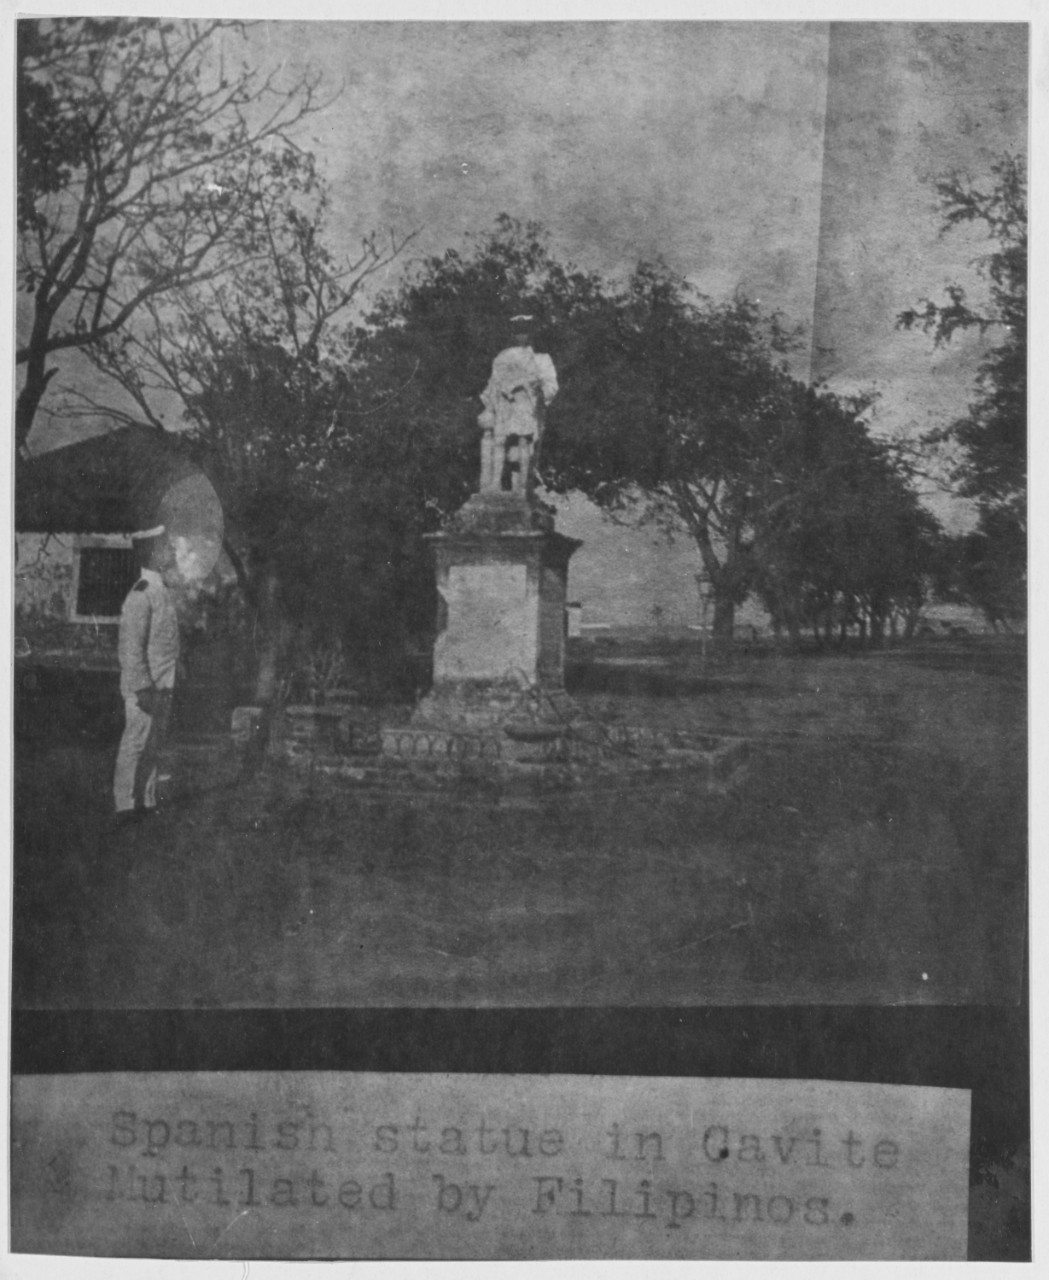 Spanish statue in Cavite mutilated by Philippines, 1900